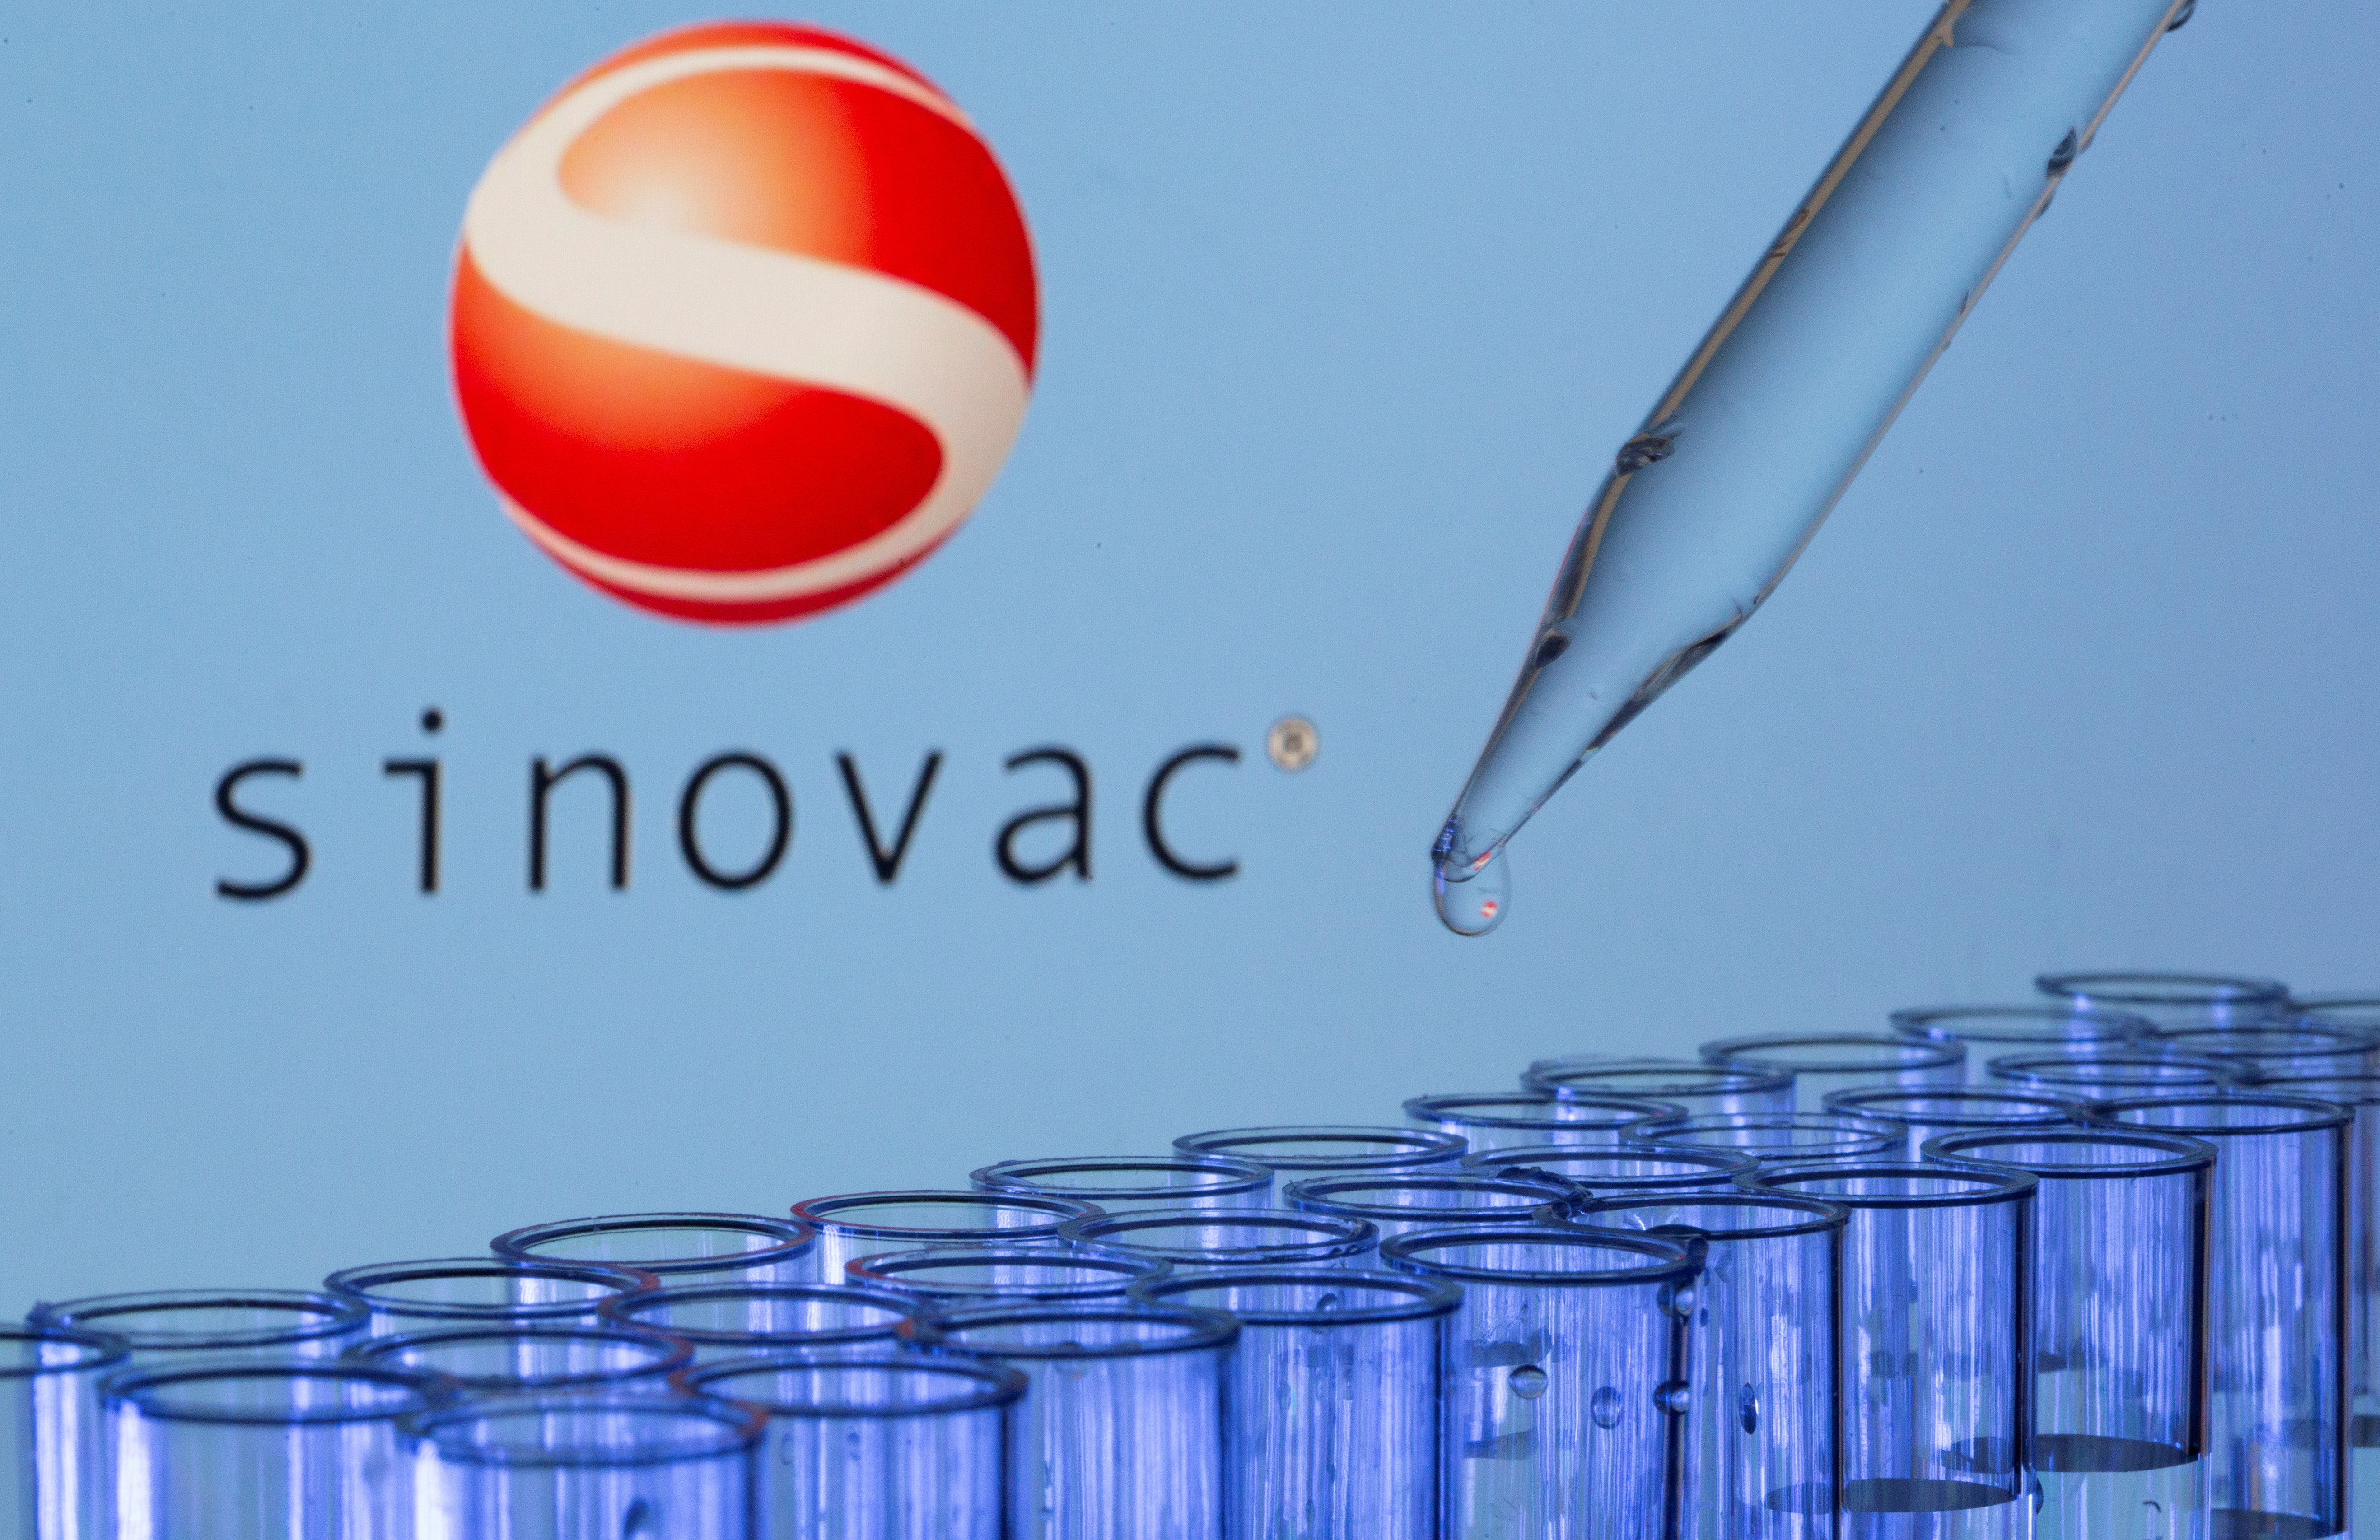 Test tubes are seen in front of a displayed Sinovac logo in this illustration taken